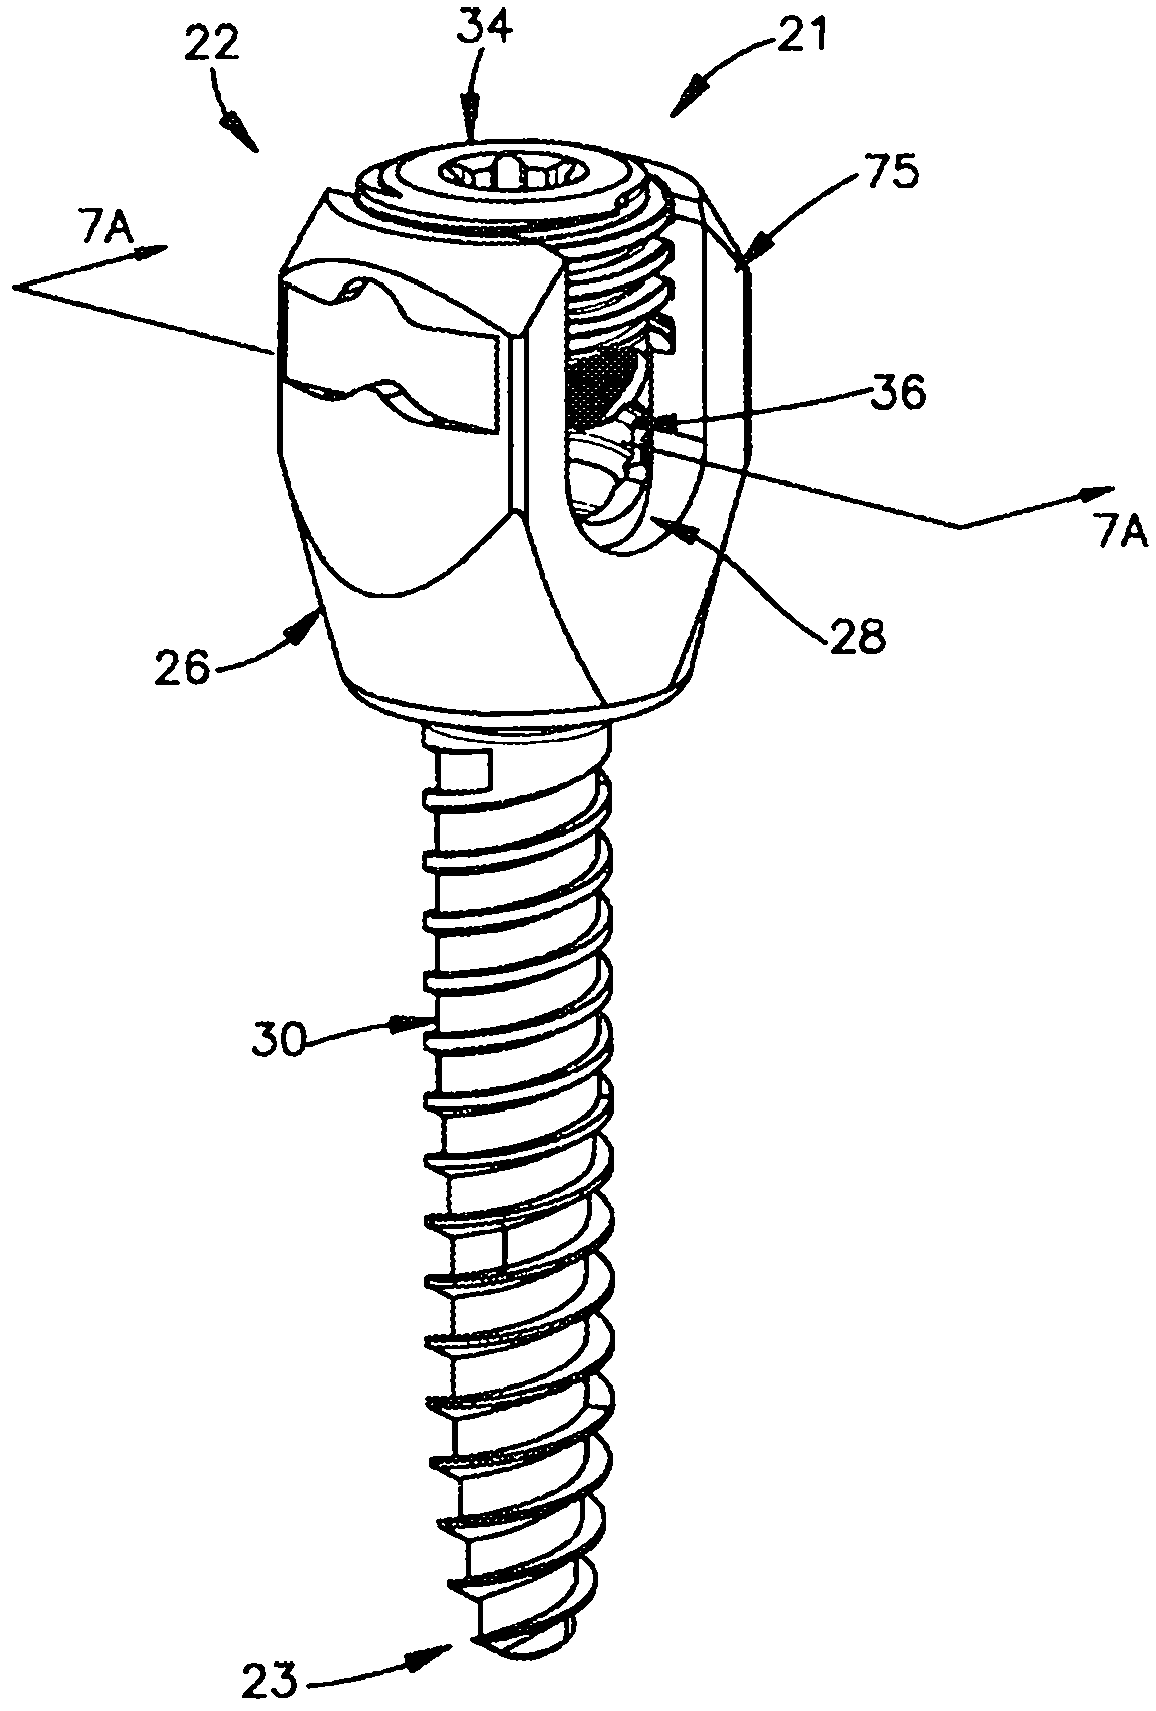 Revision connector for spinal constructs